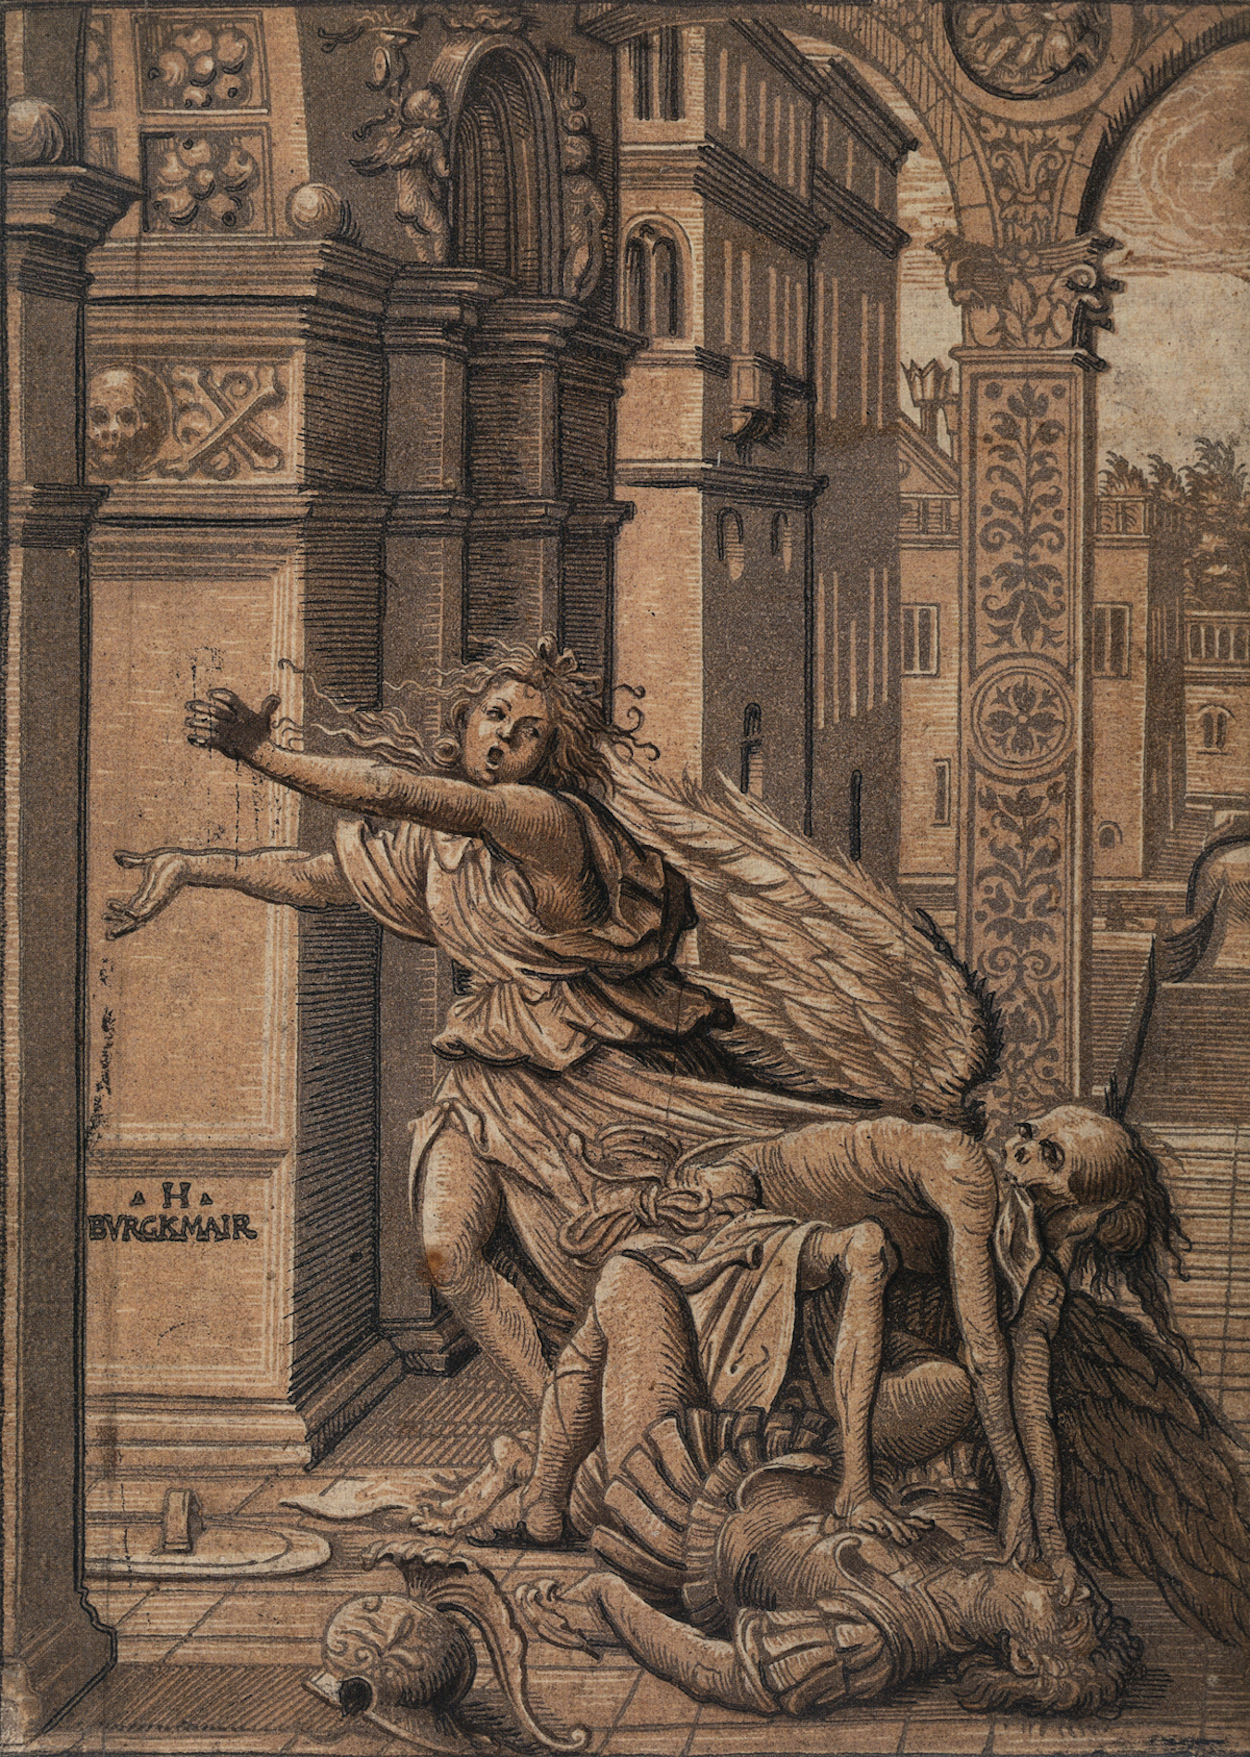 Lovers Overcome by Death by Hans Burgkmair - c. 1510 - 21 x 15 cm British Museum